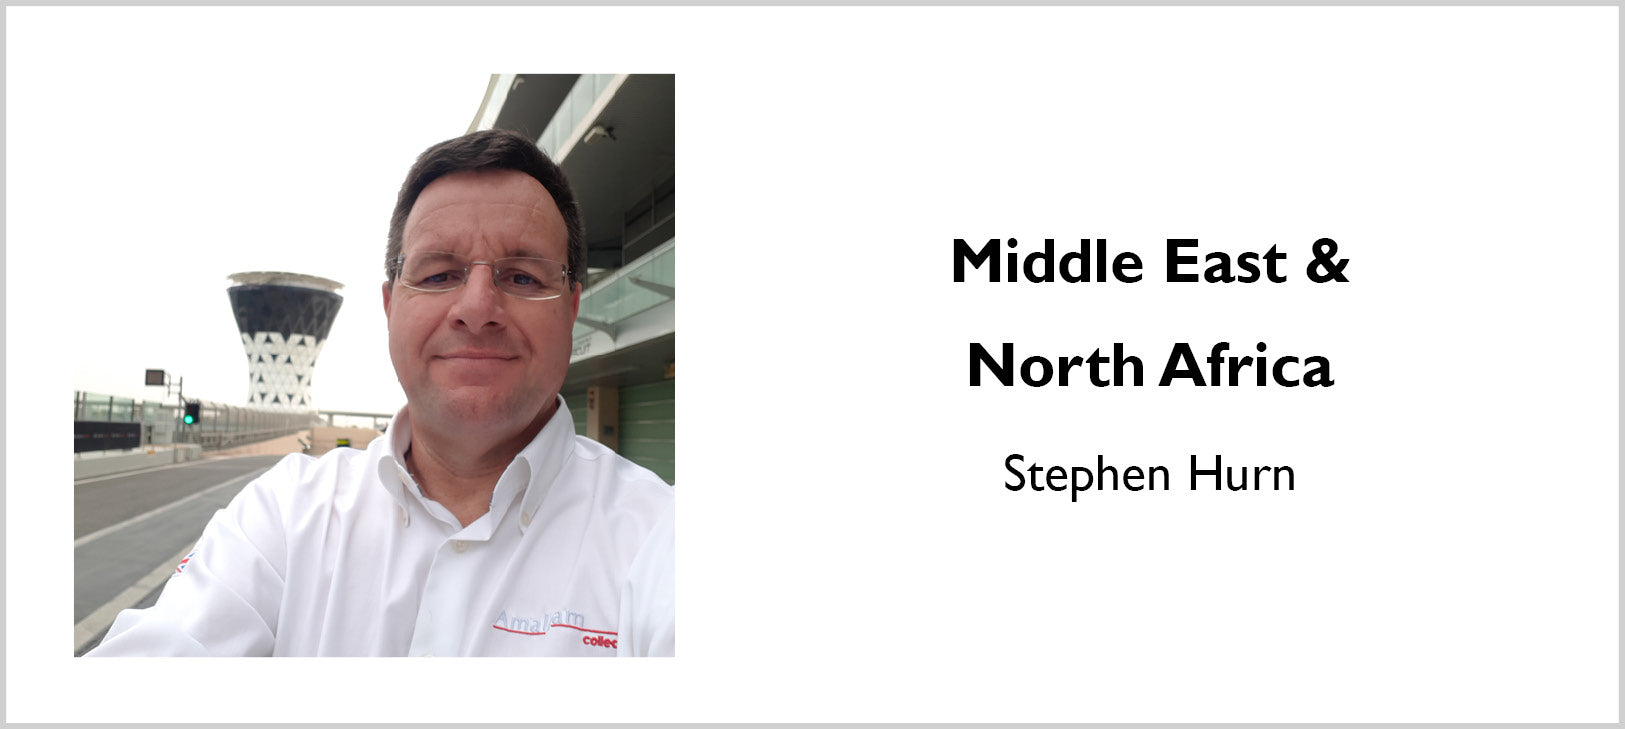 Stephen Hurn - Middle East & North Africa